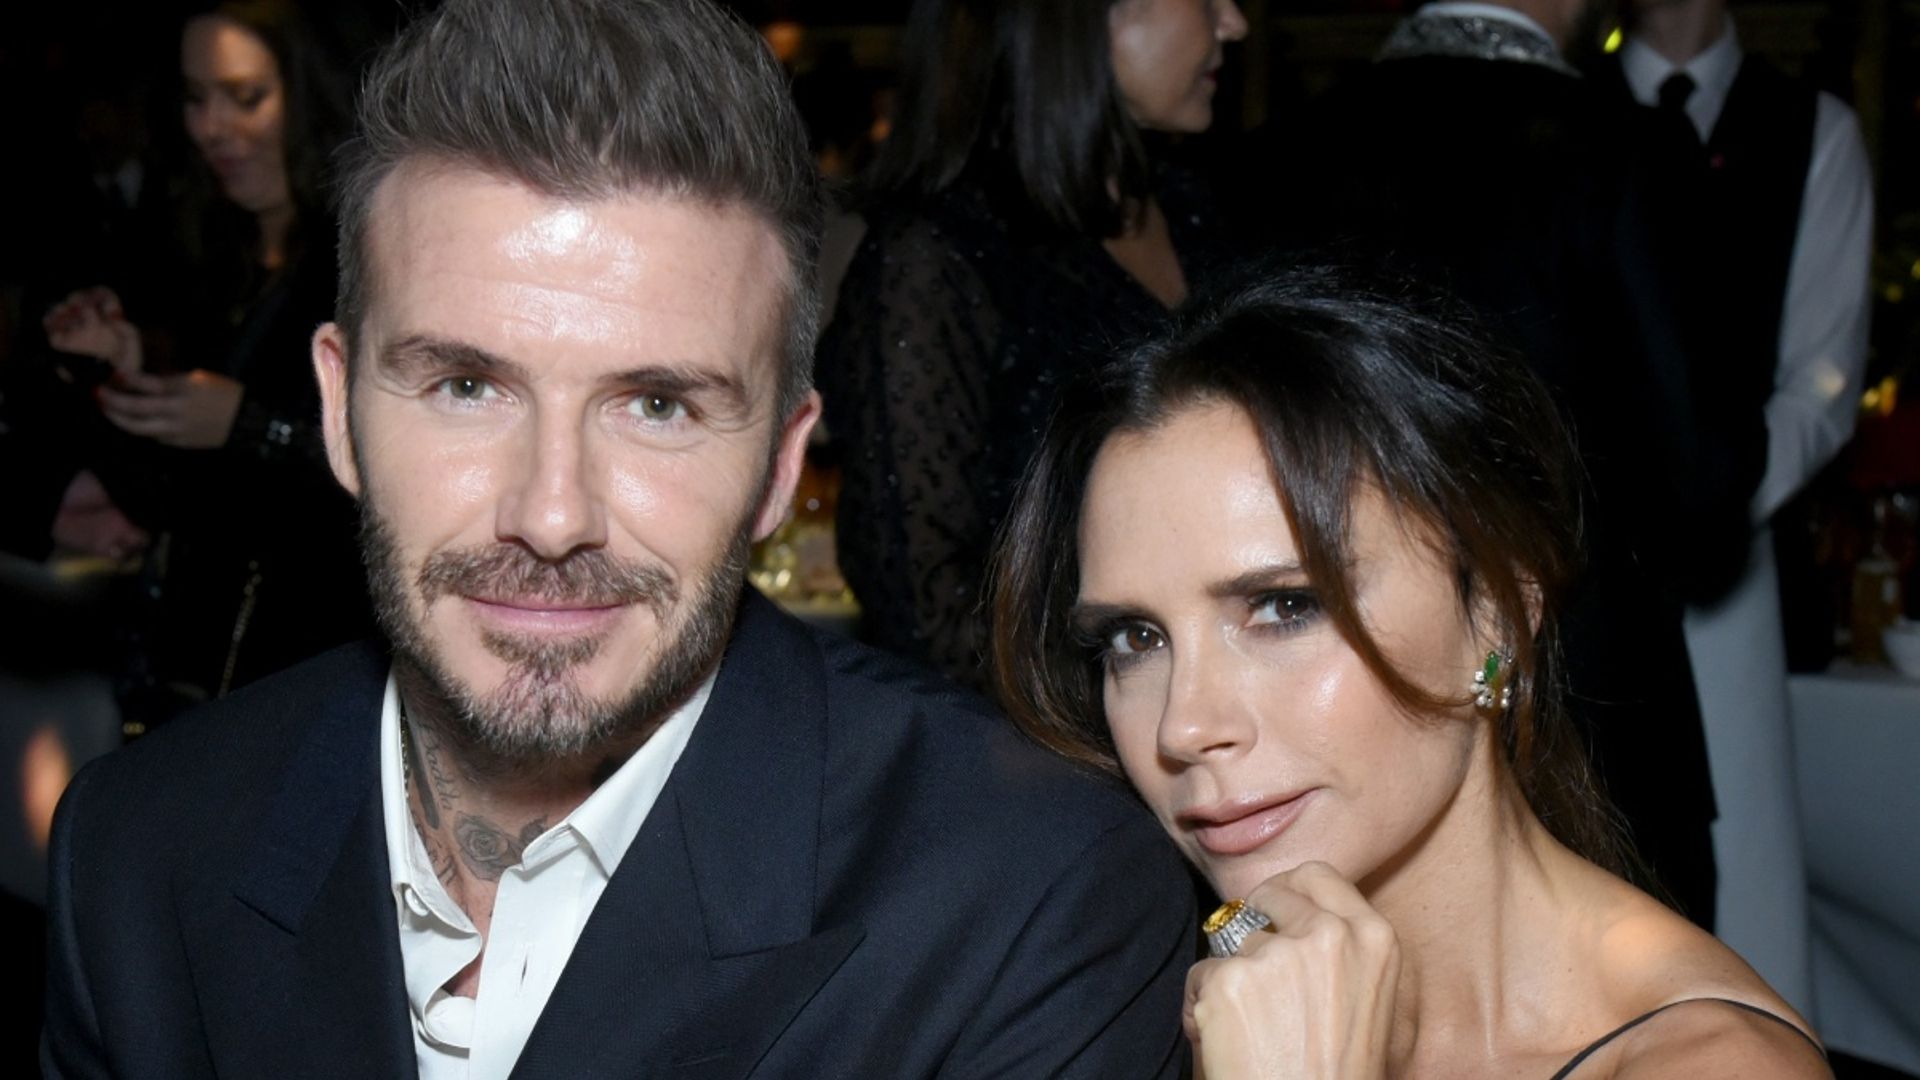 David Beckham is spotted in Paris with wife Victoria